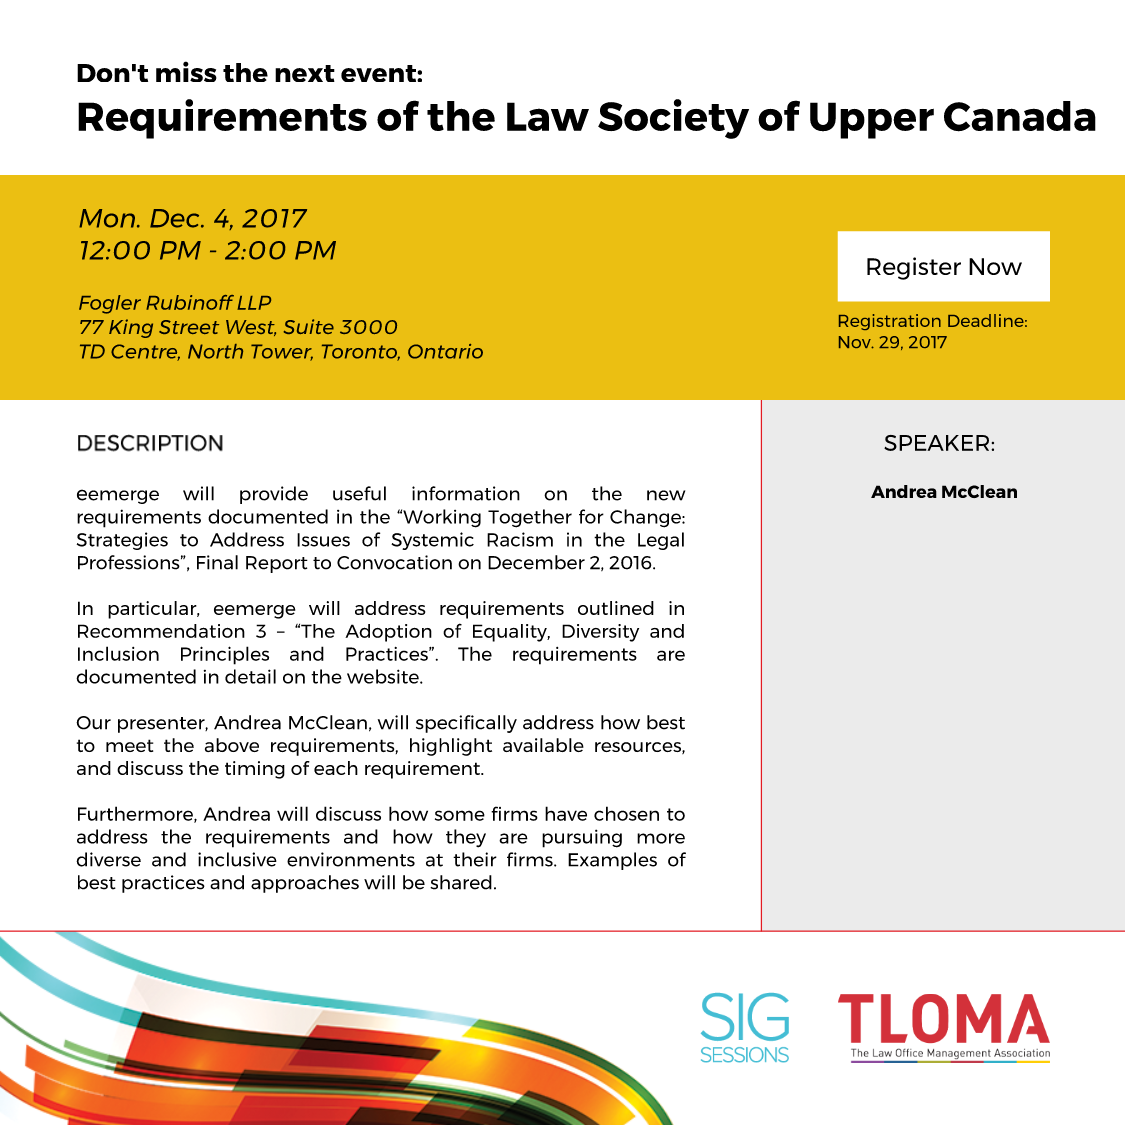 Requirements of the Law Society of Upper Canada